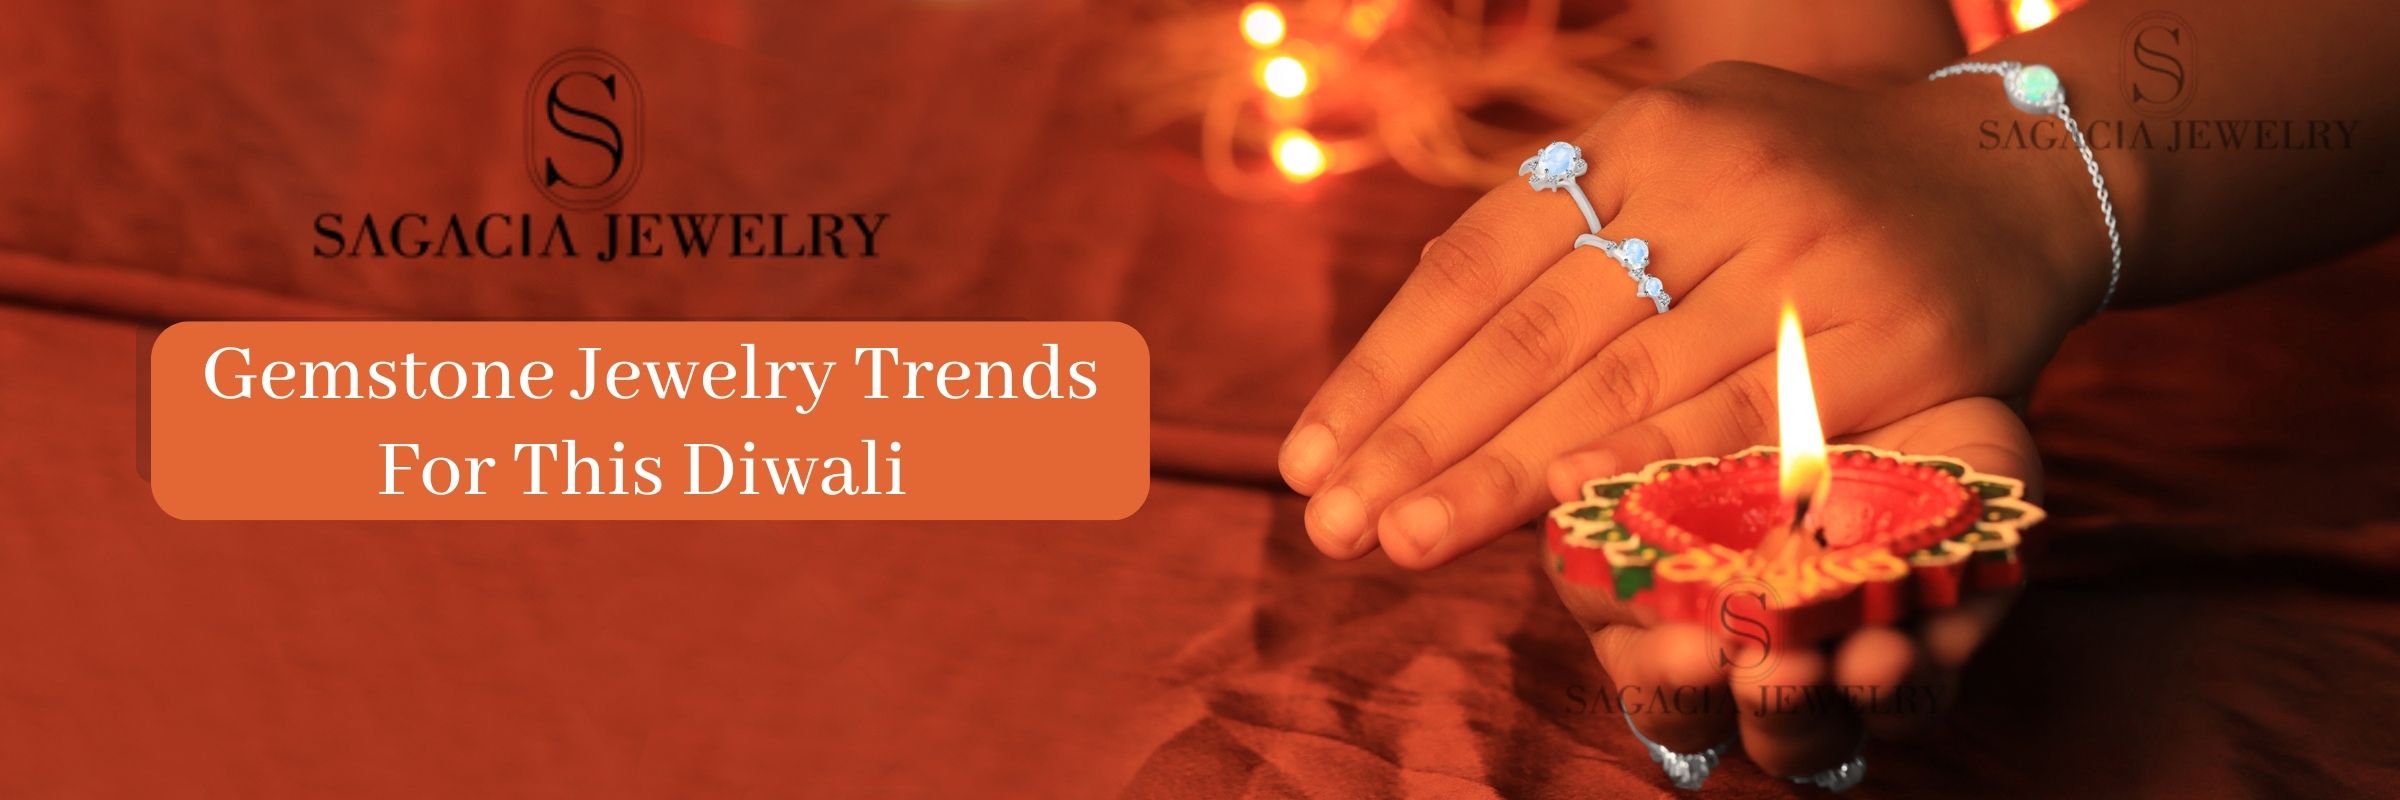 Gemstone Jewelry Trends For This Diwali